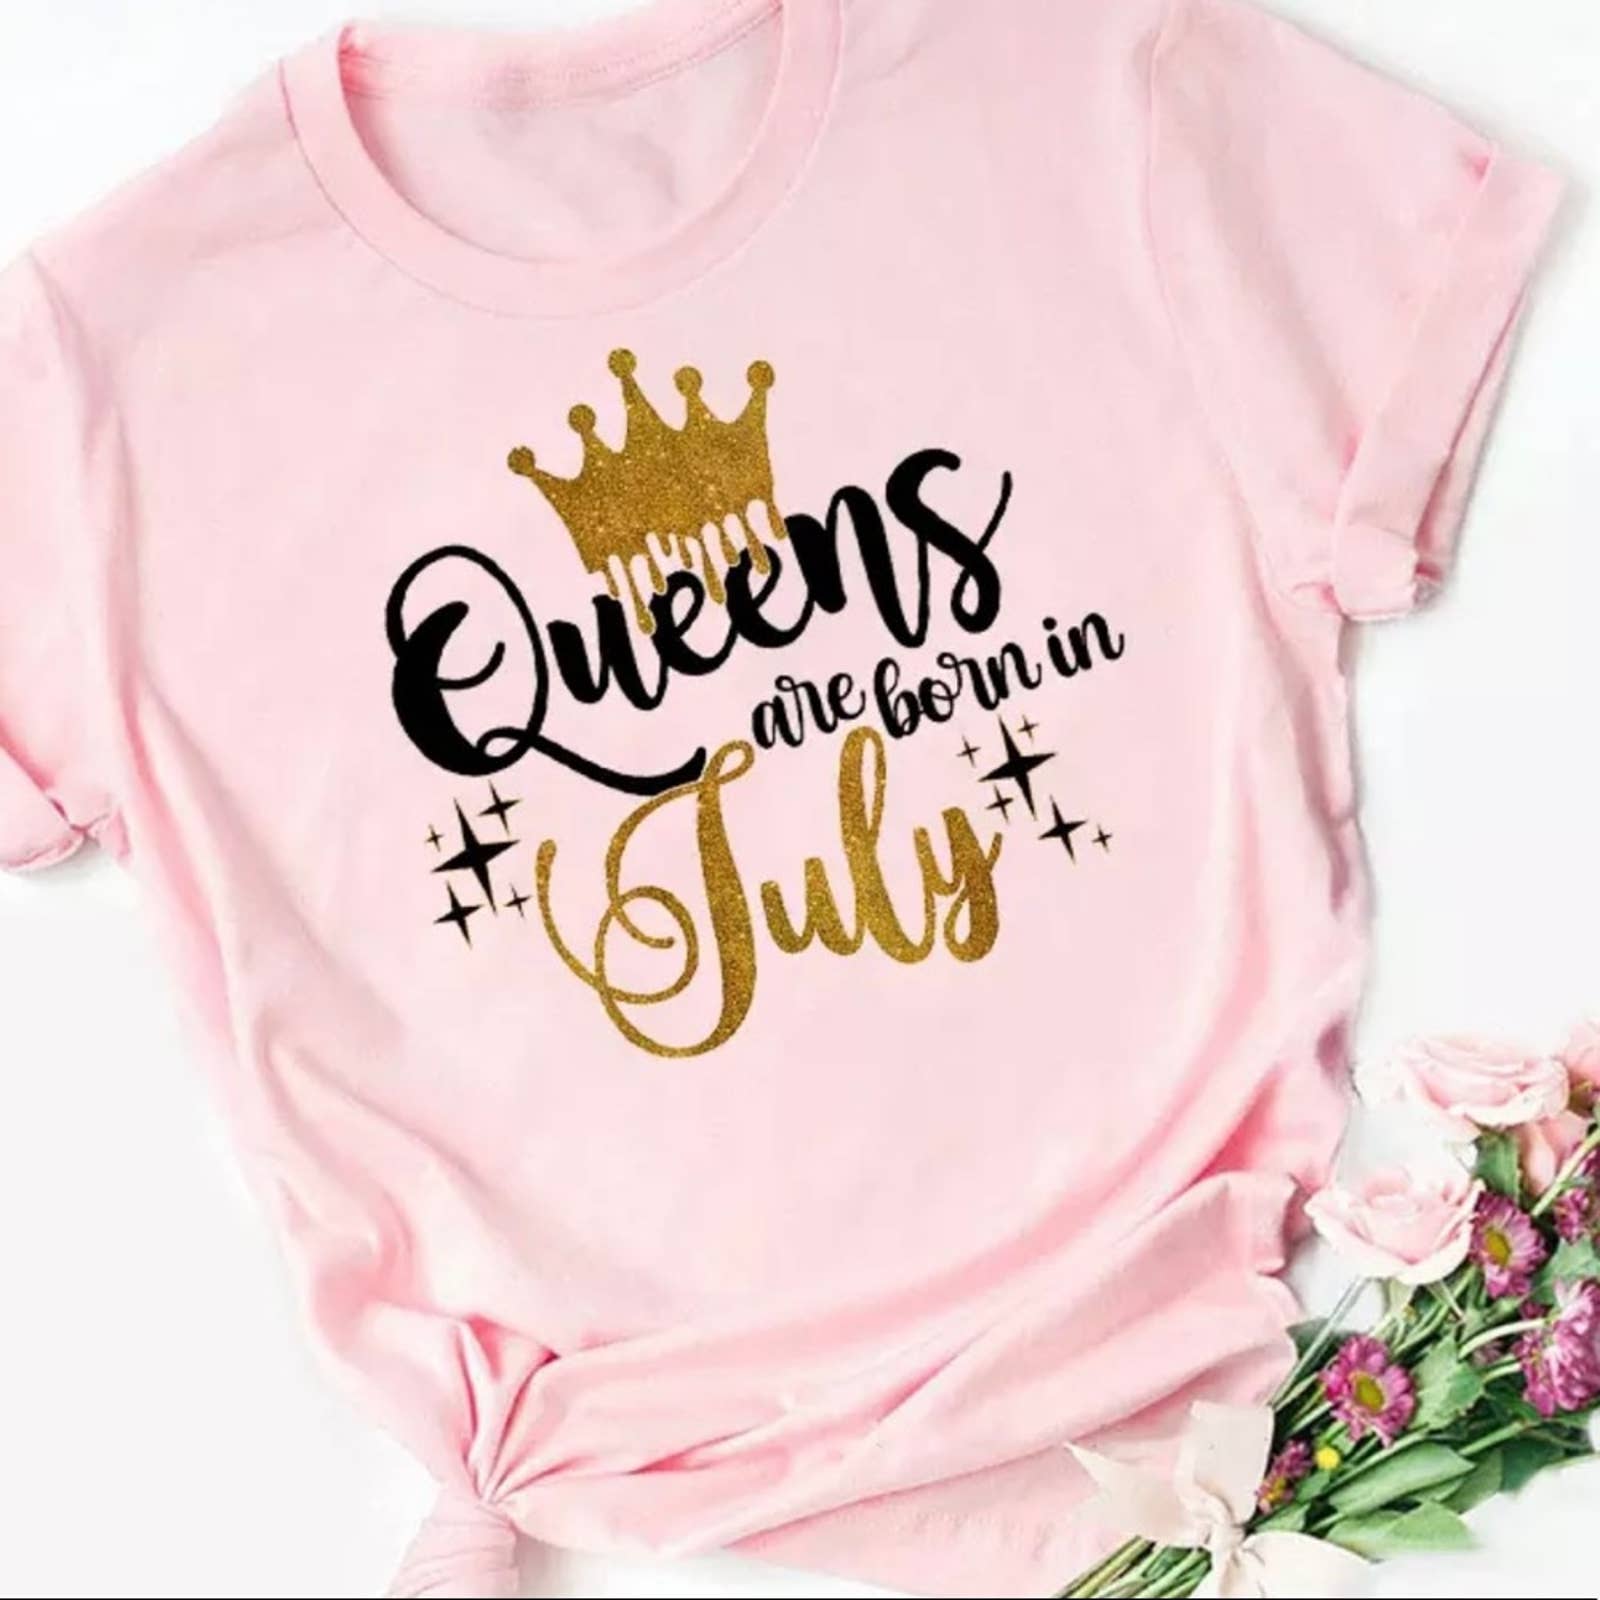 It's the Queen's Birthday in July Tee-Shirt - Passion of Essence Boutique